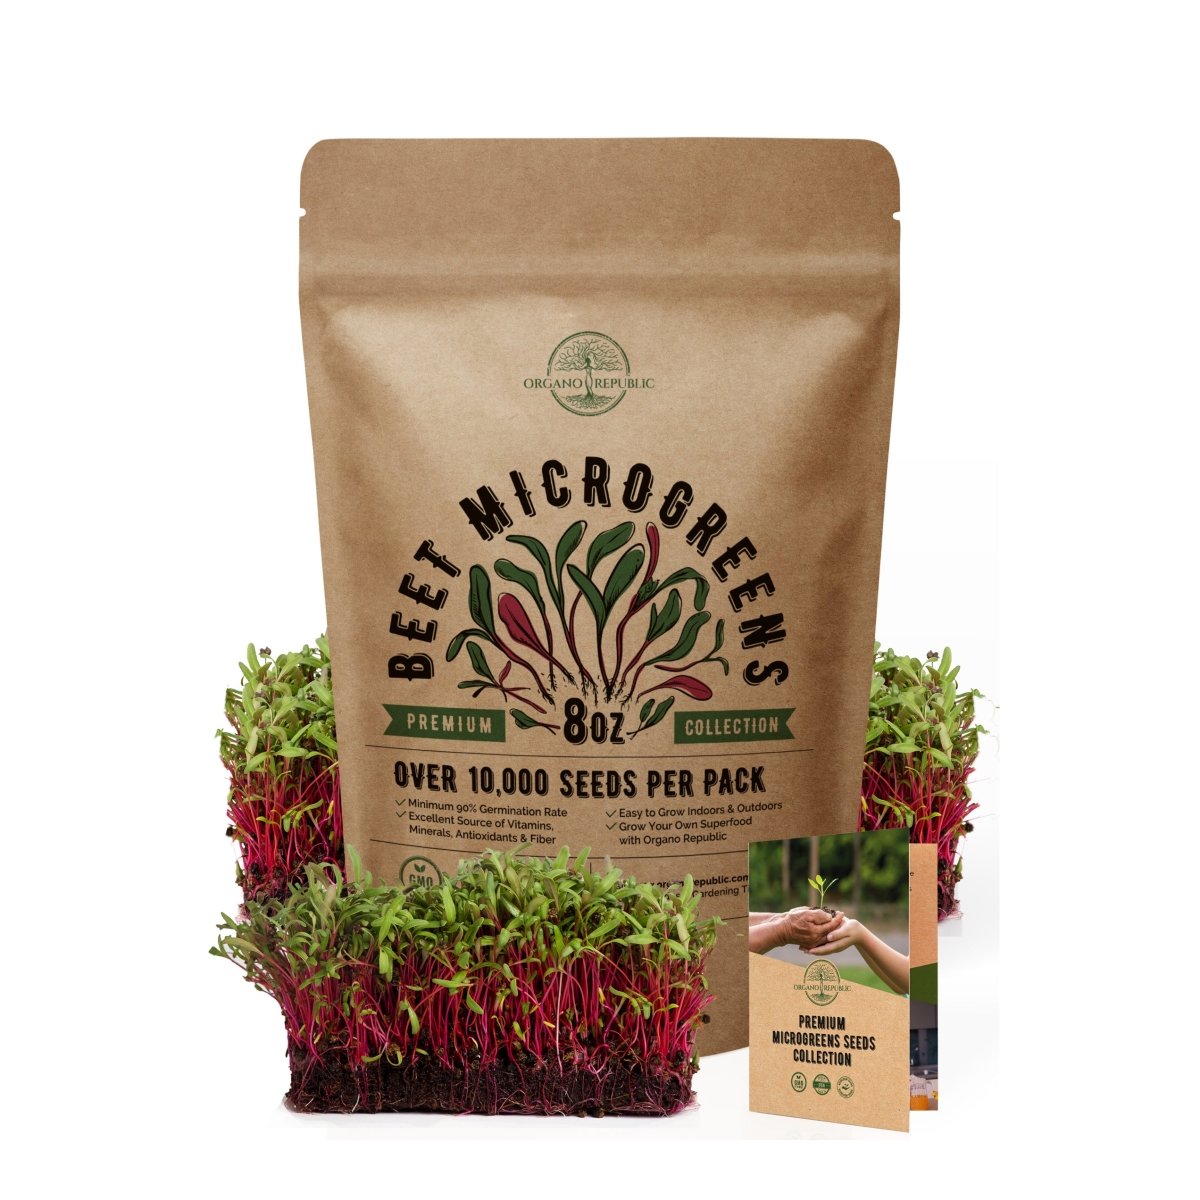 Beet Sprouting & Microgreens Seeds 8oz - Over 10 000 Non-GMO, Heirloom Seeds - Organo Republic